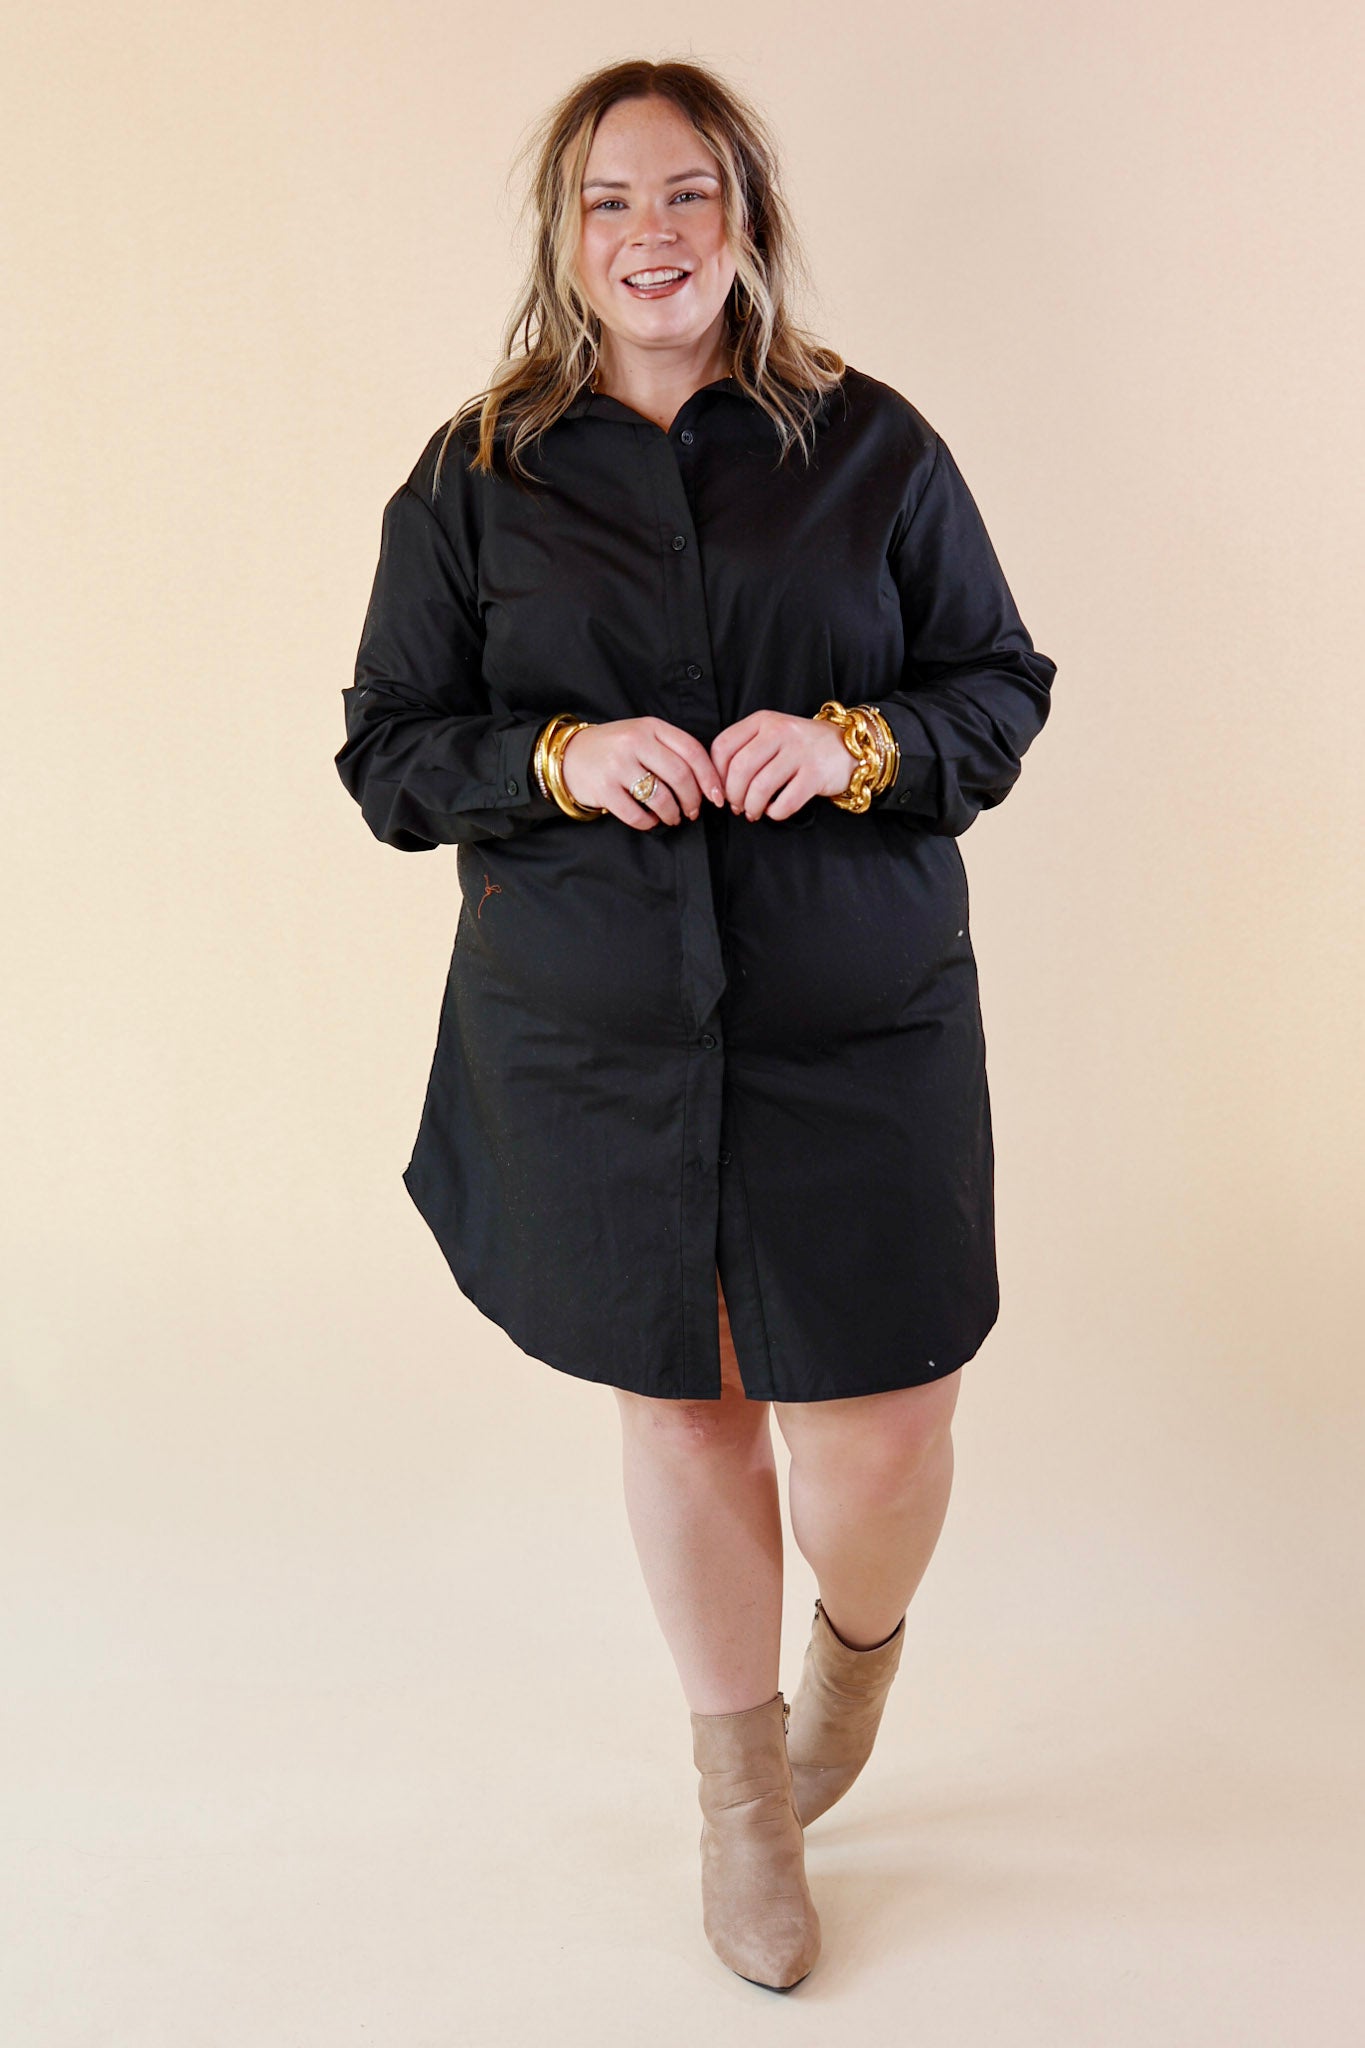 Keeps Getting Better Button Up Dress with Collared Neckline in Black - Giddy Up Glamour Boutique